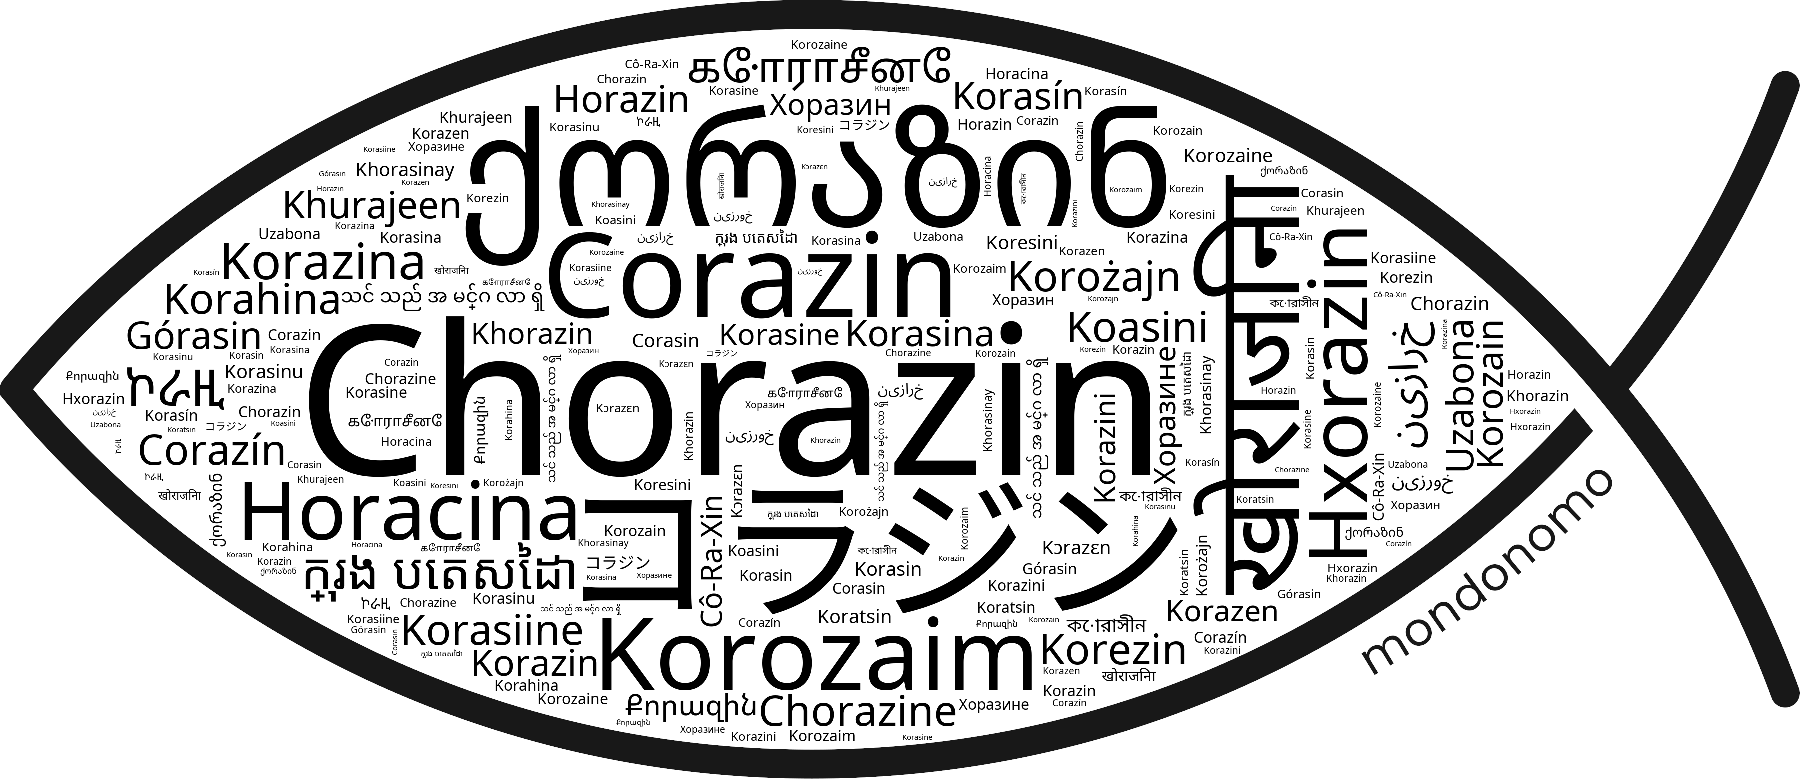 Name Chorazin in the world's Bibles